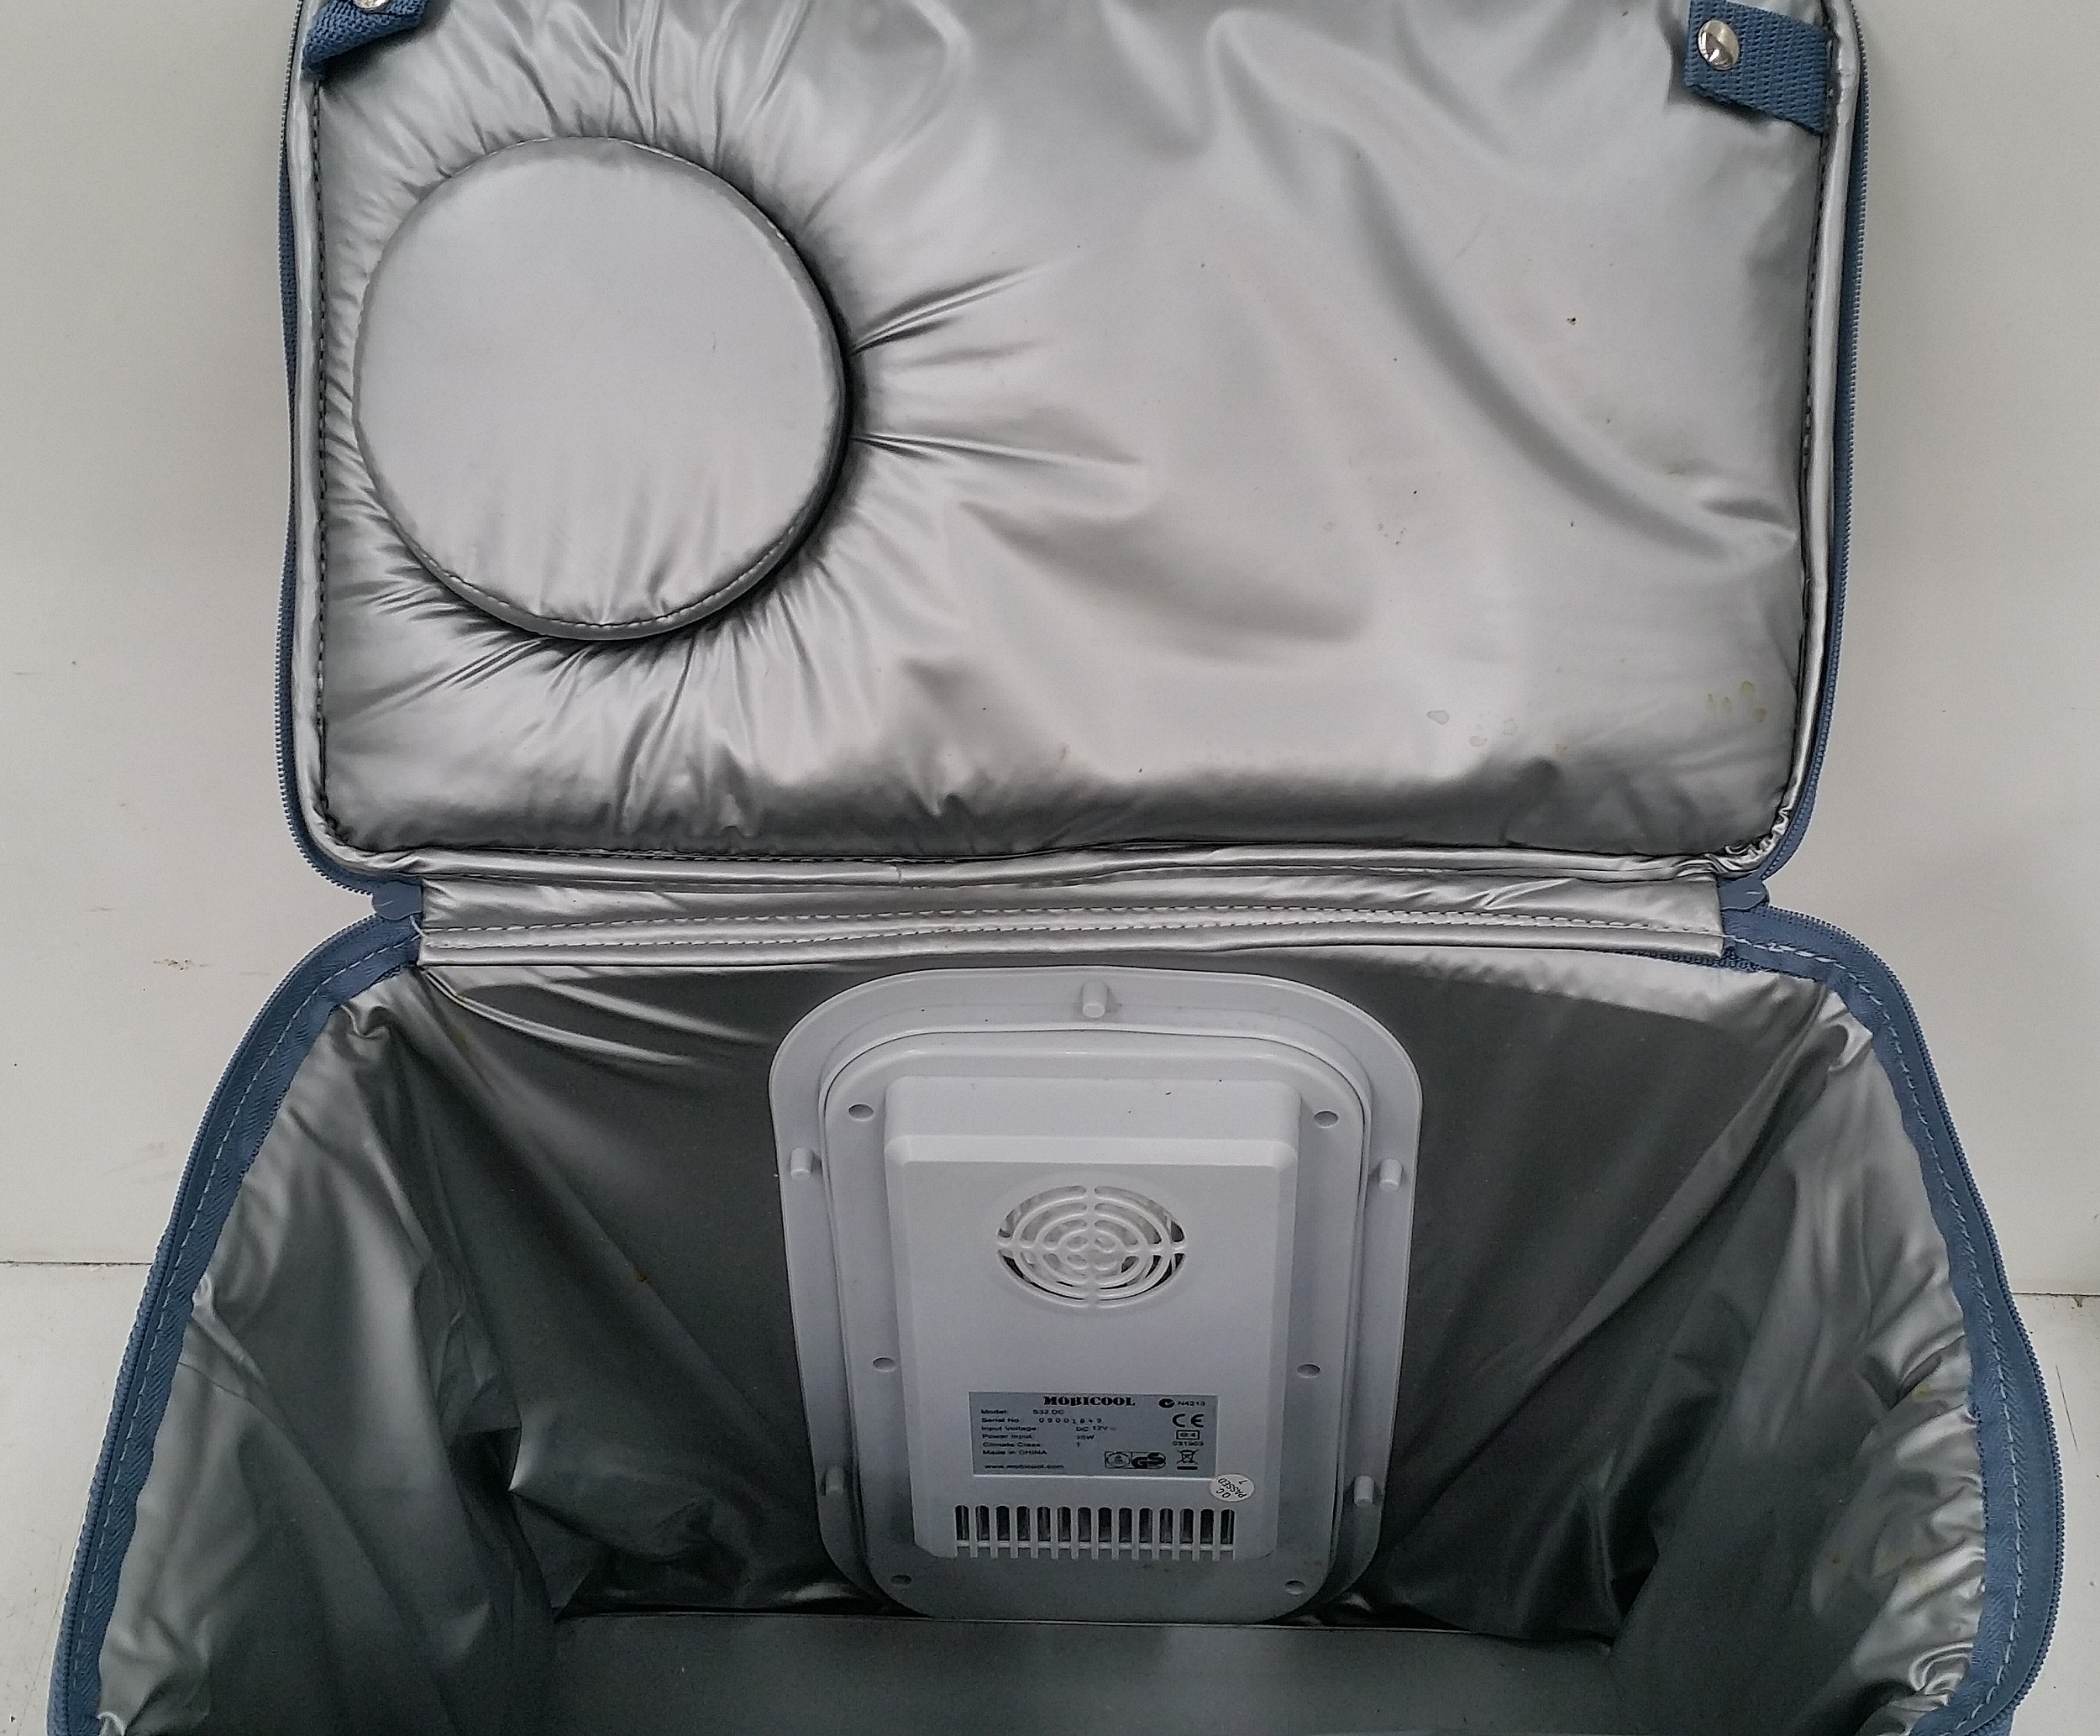 Mobicool S32 - 32 l Thermoelectric cool bag – 12 V